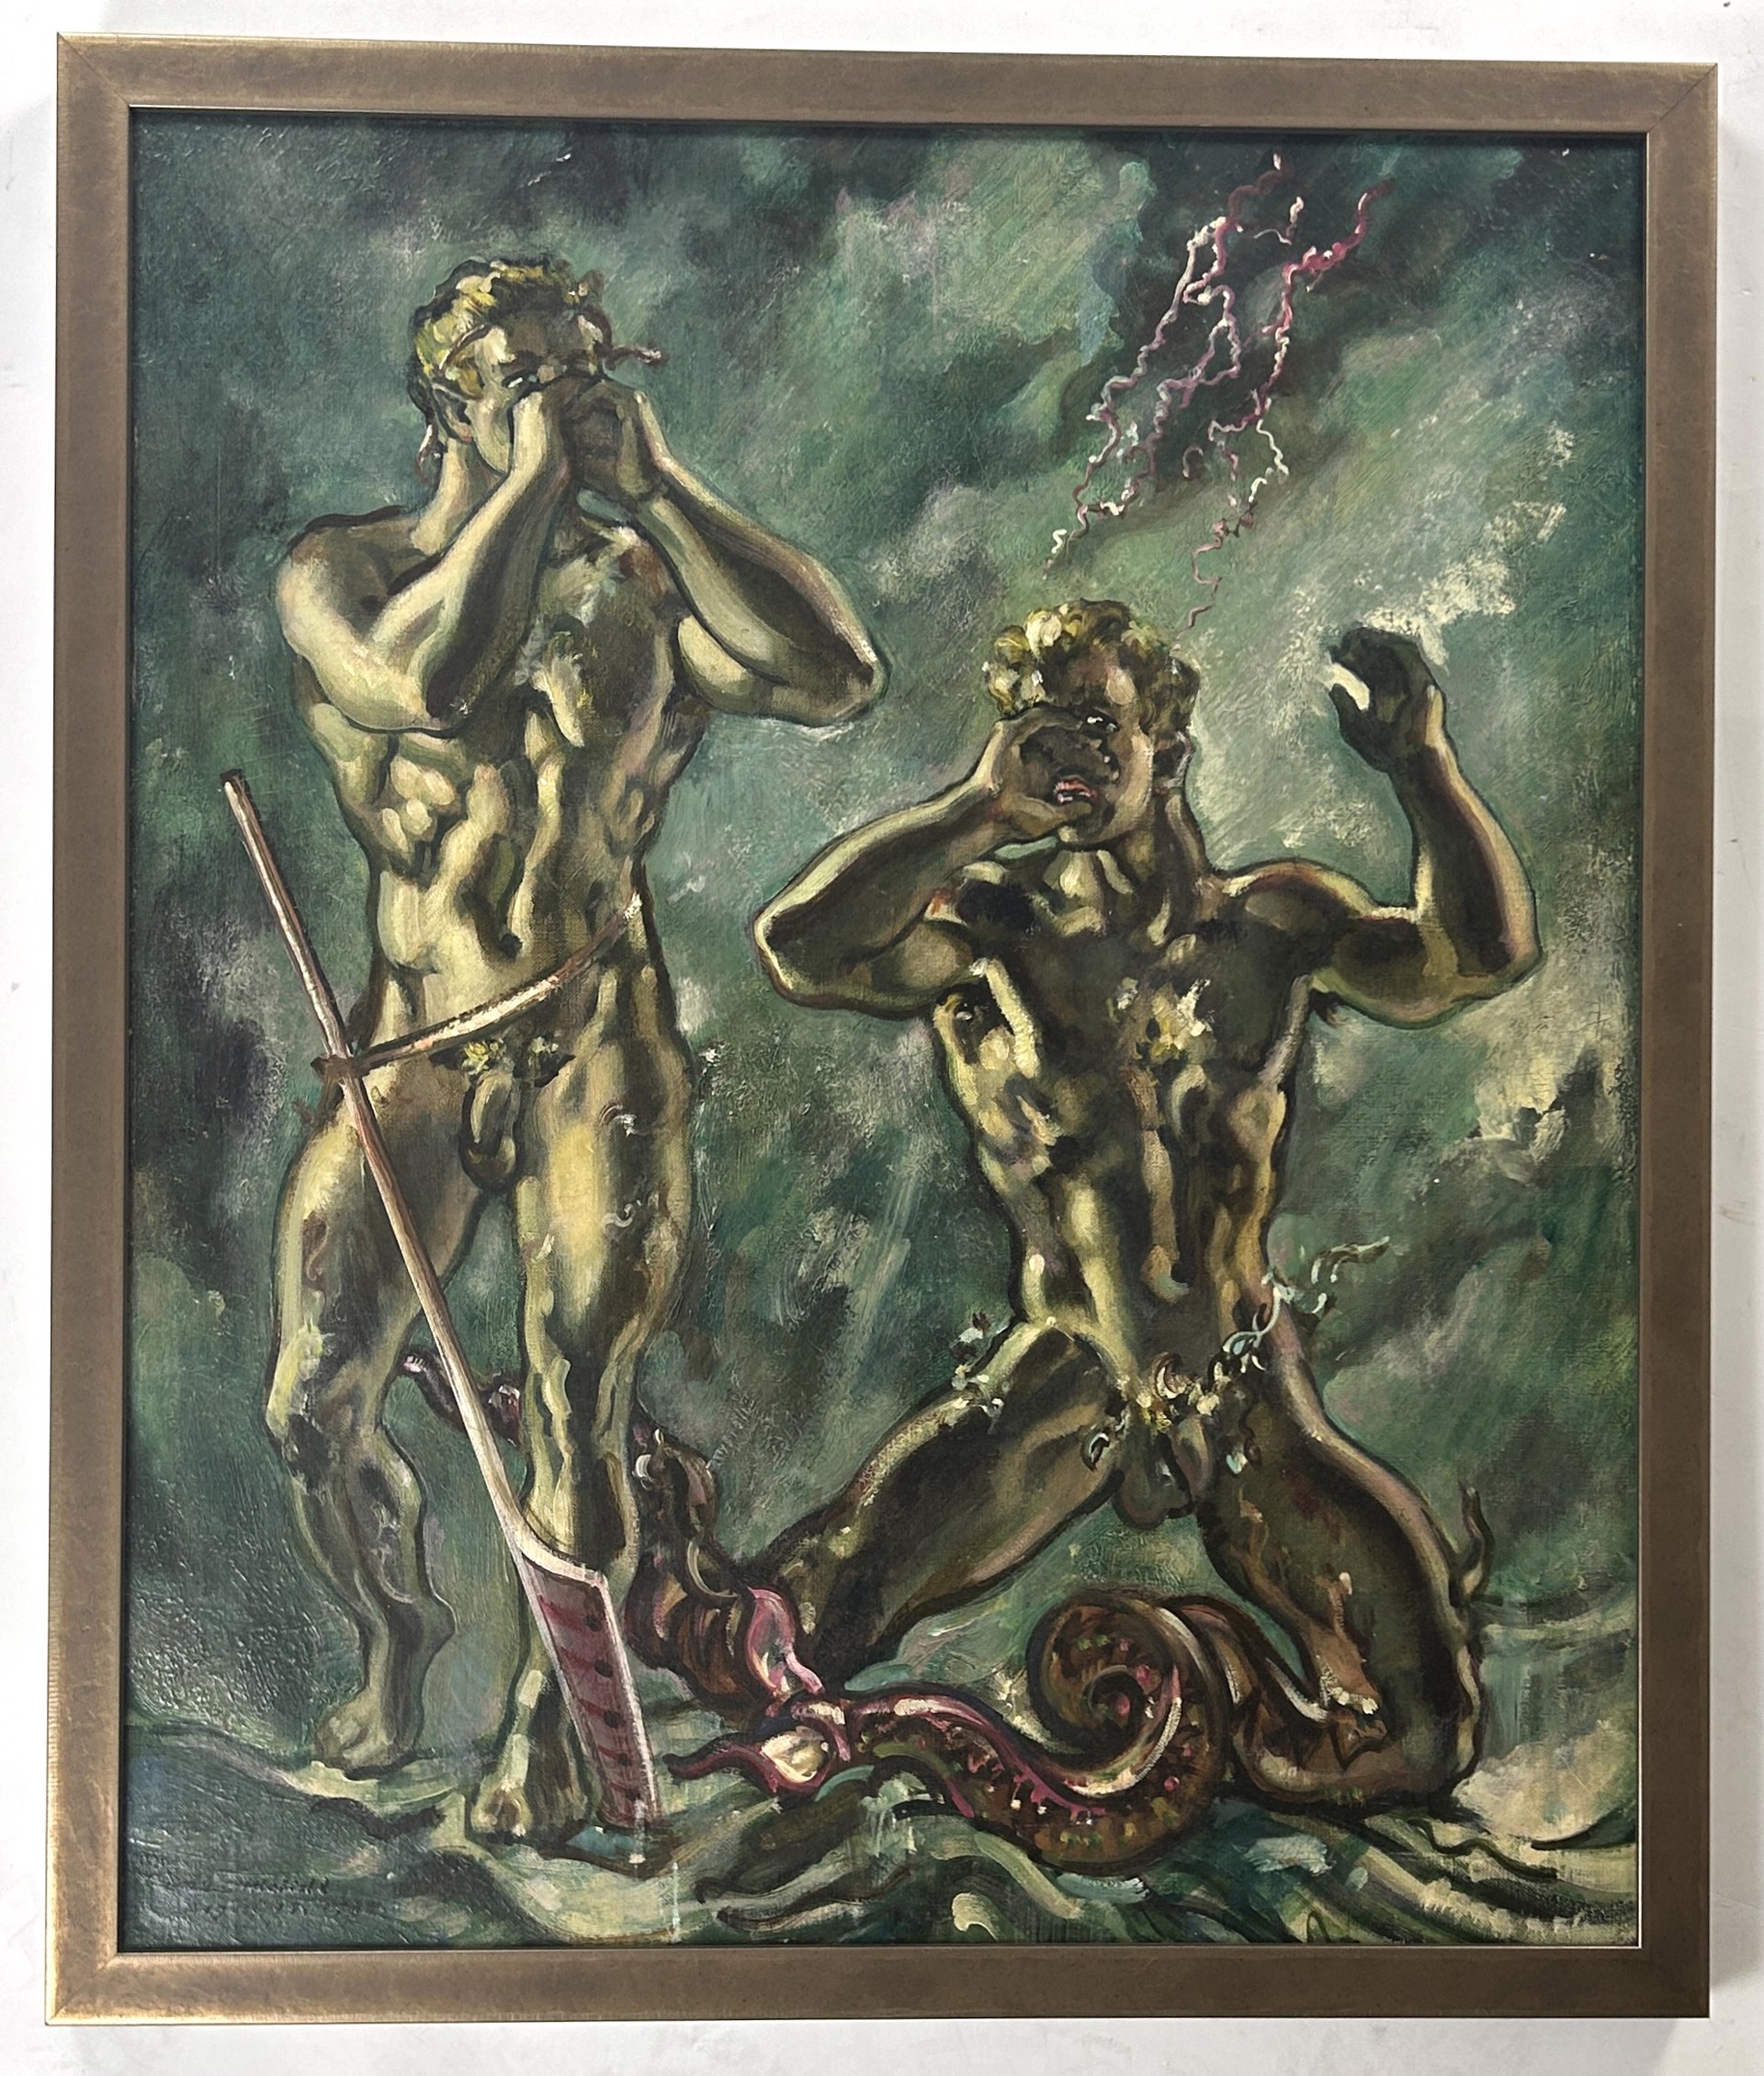 Tritons by William H. Littlefield